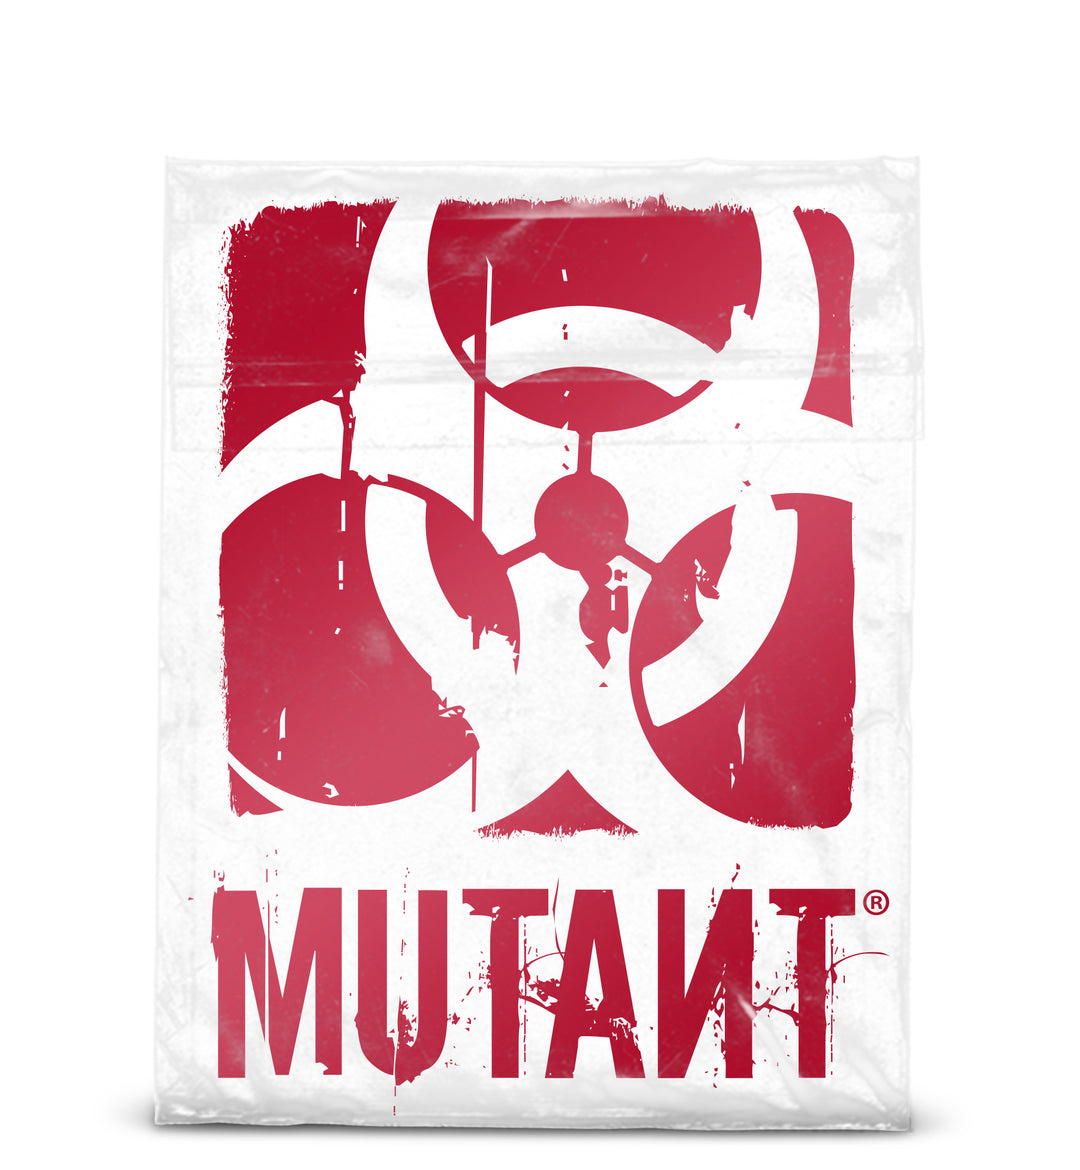 A photo of the Rugged Truck Window Decal, showcasing the MUTANT logo in red, displayed on a transparent plastic bag against a white background.